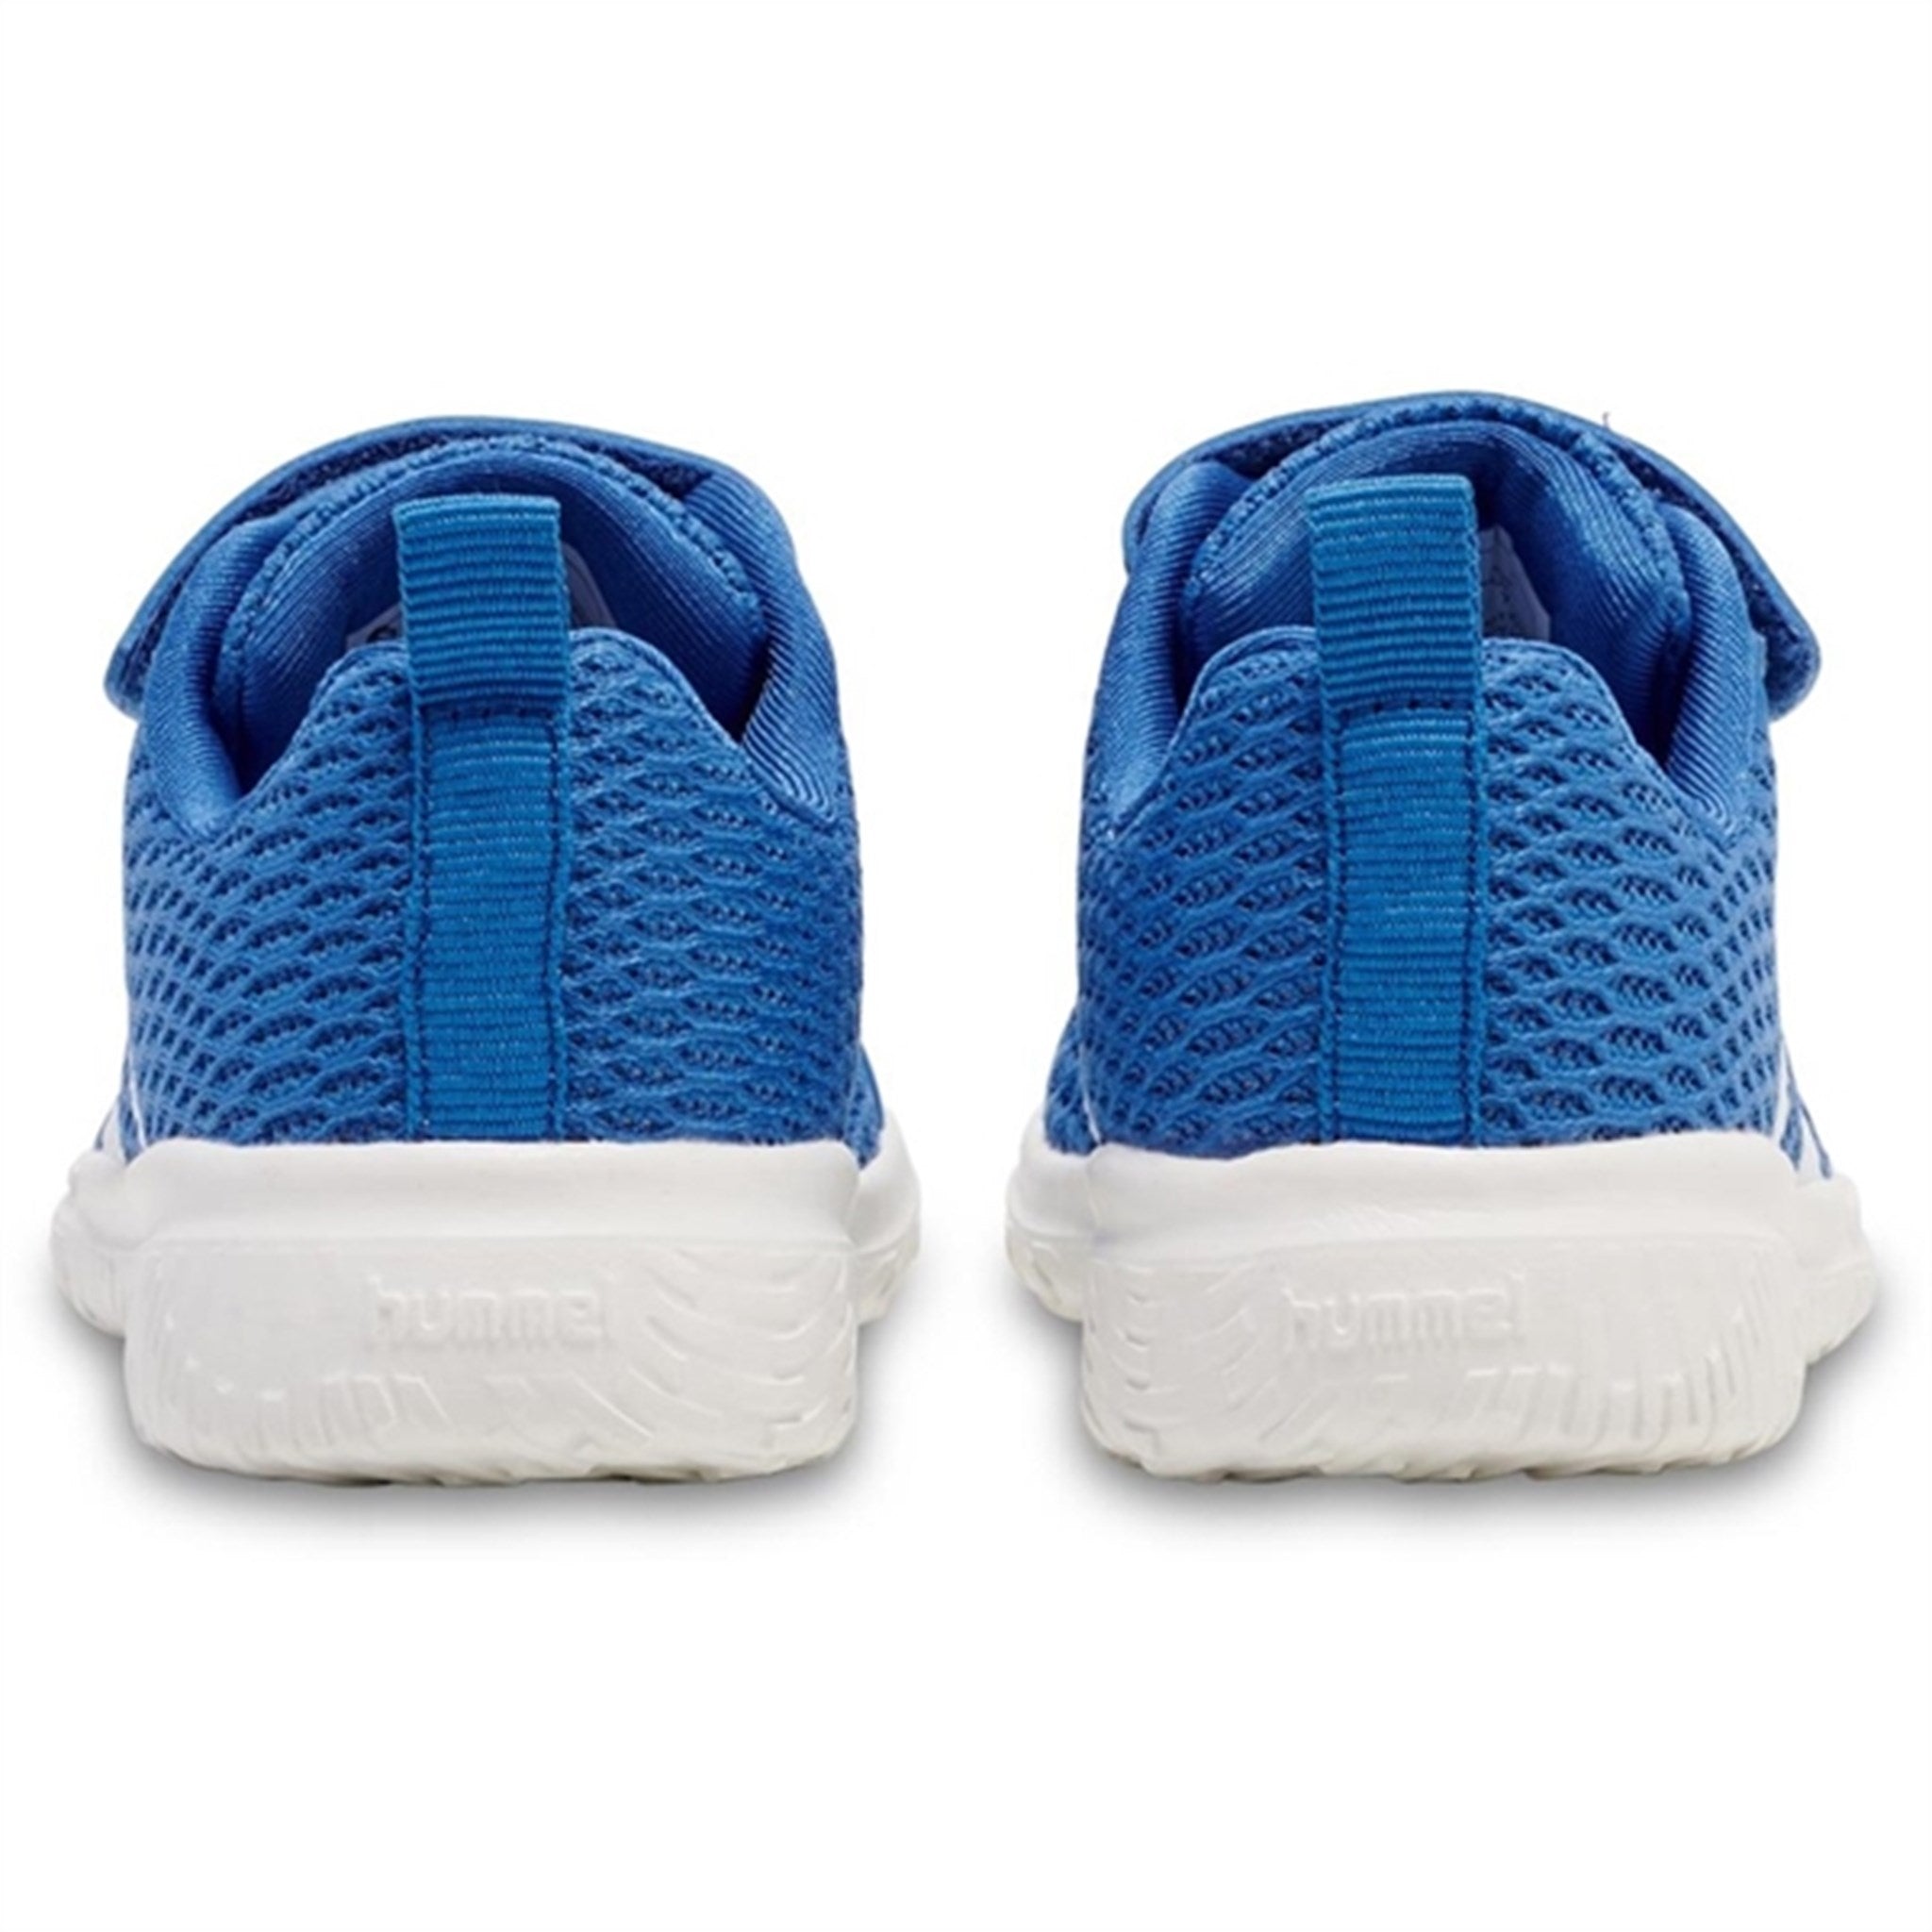 Hummel Actus Recycled Infant Sneakers Blue/White 5